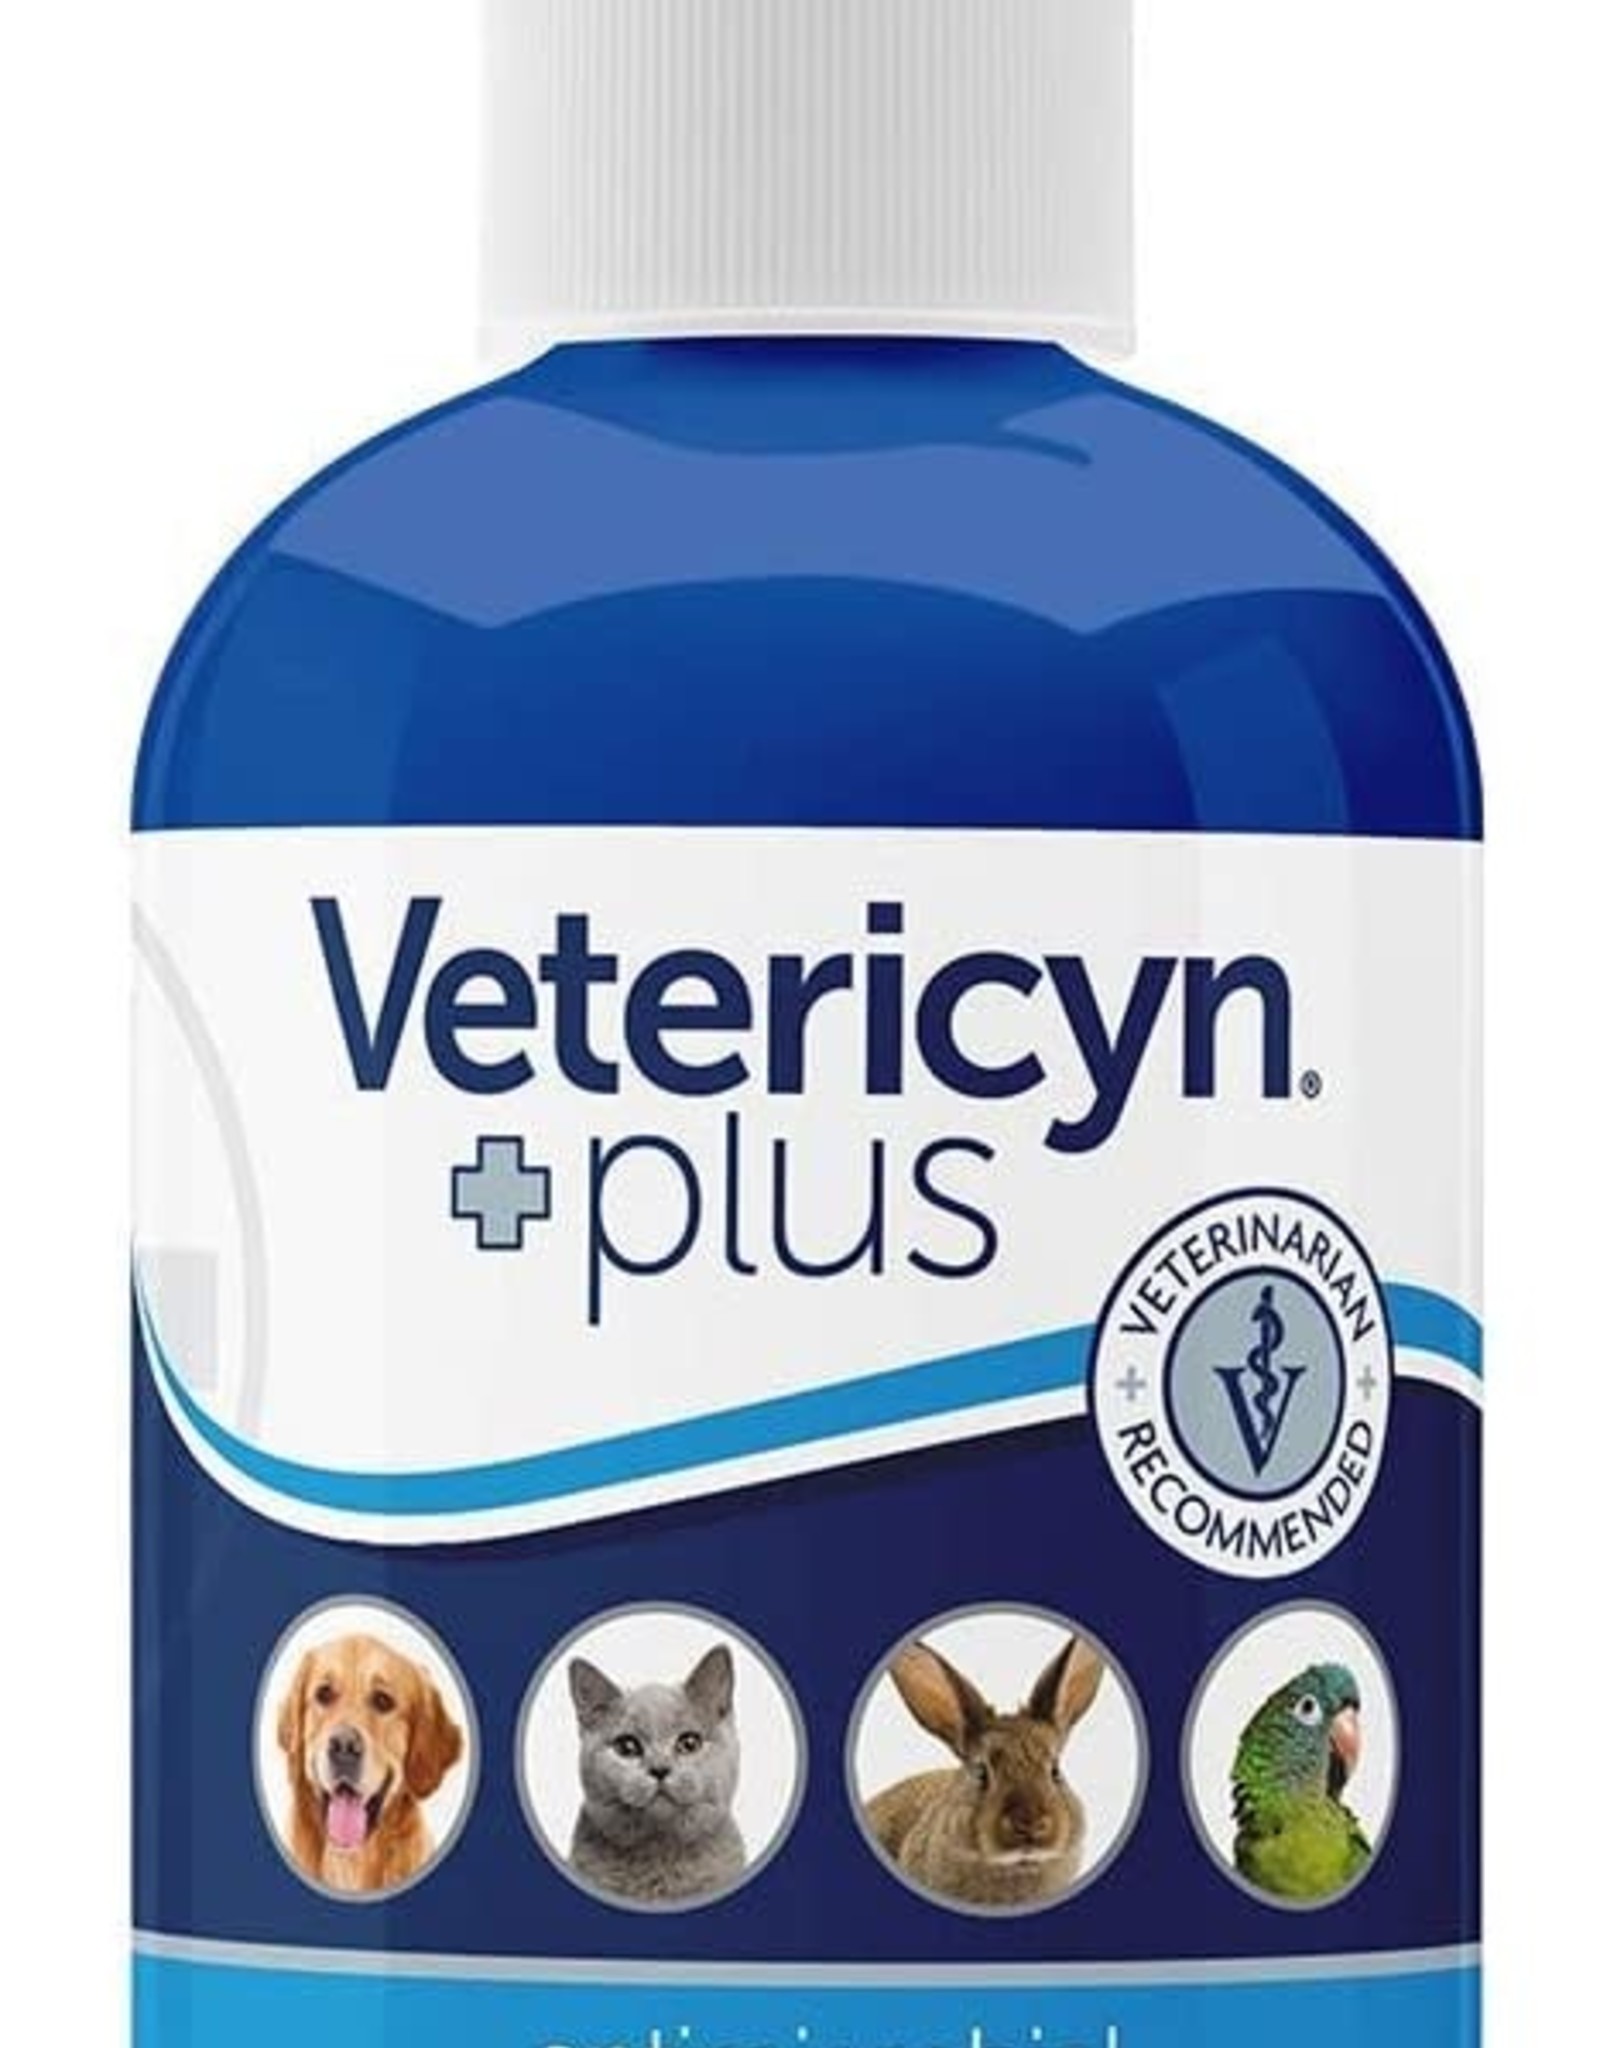 VETERICYN Vetericyn Plus Antimicrobial Wound and Skin Care 3 oz